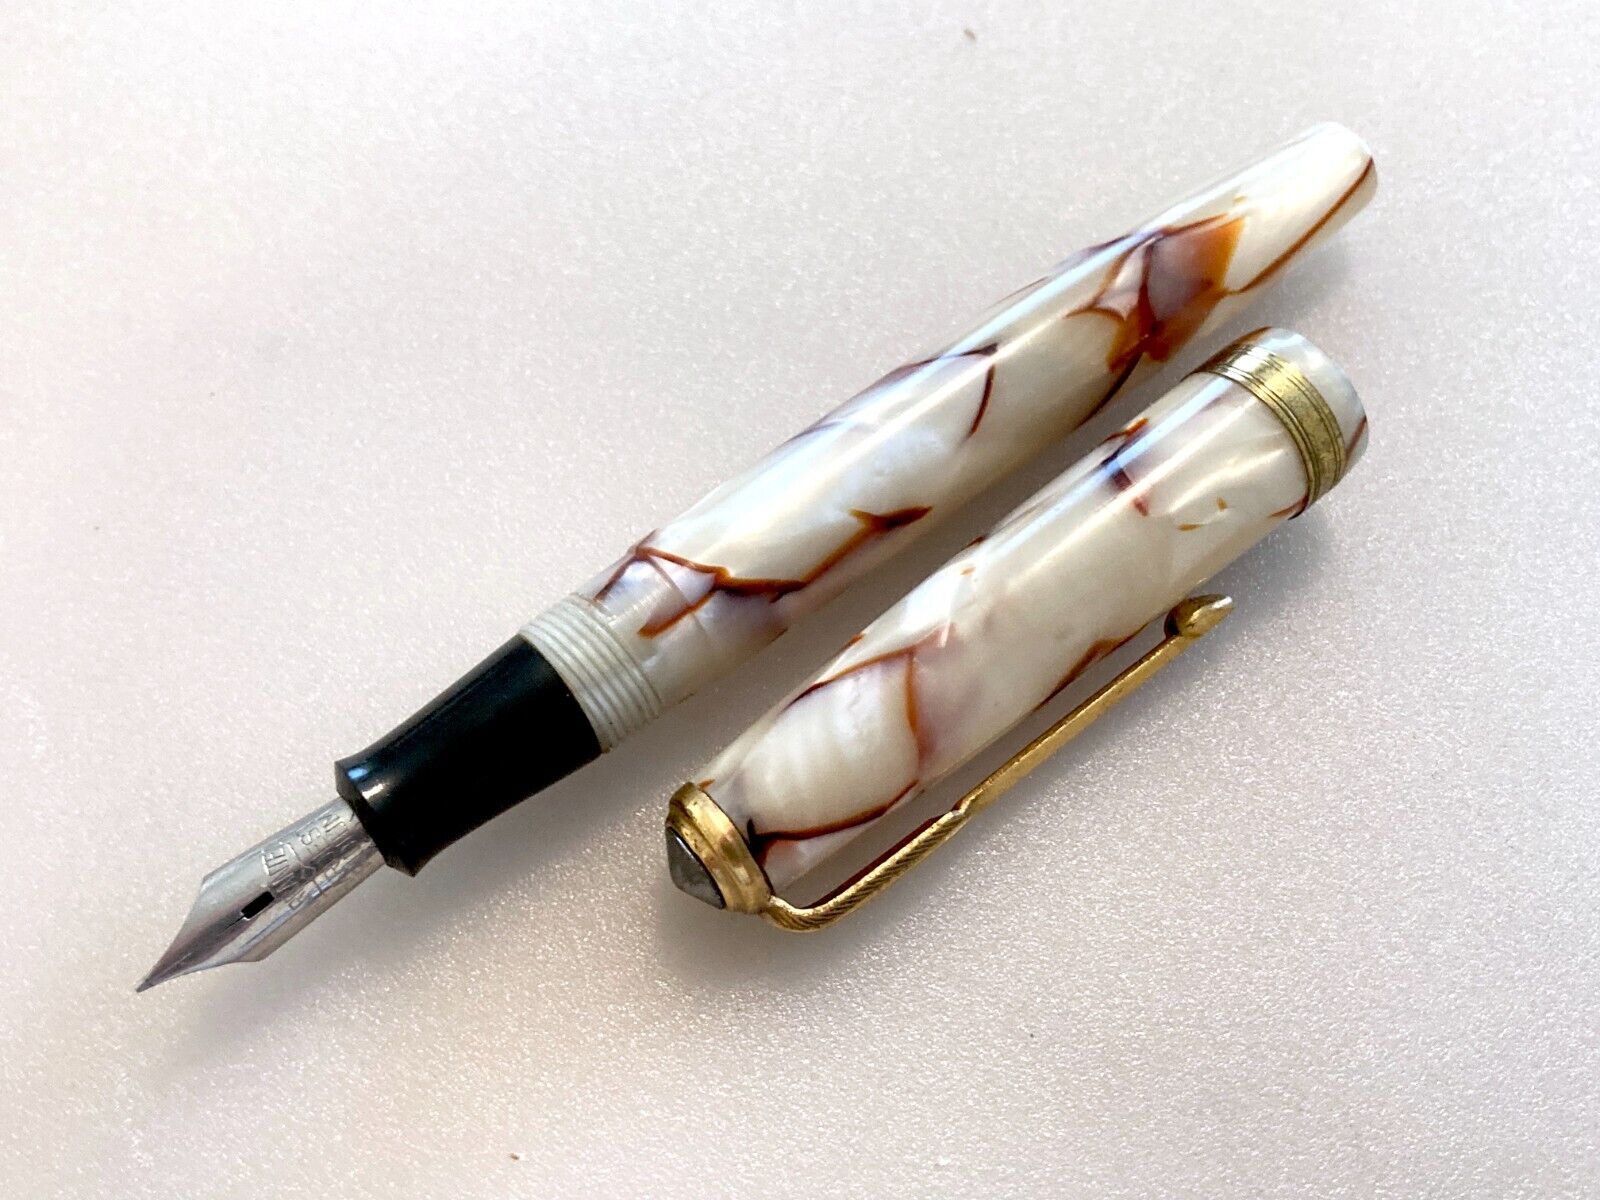 Japanese  vintage  fountain pen  with new sac from Japan